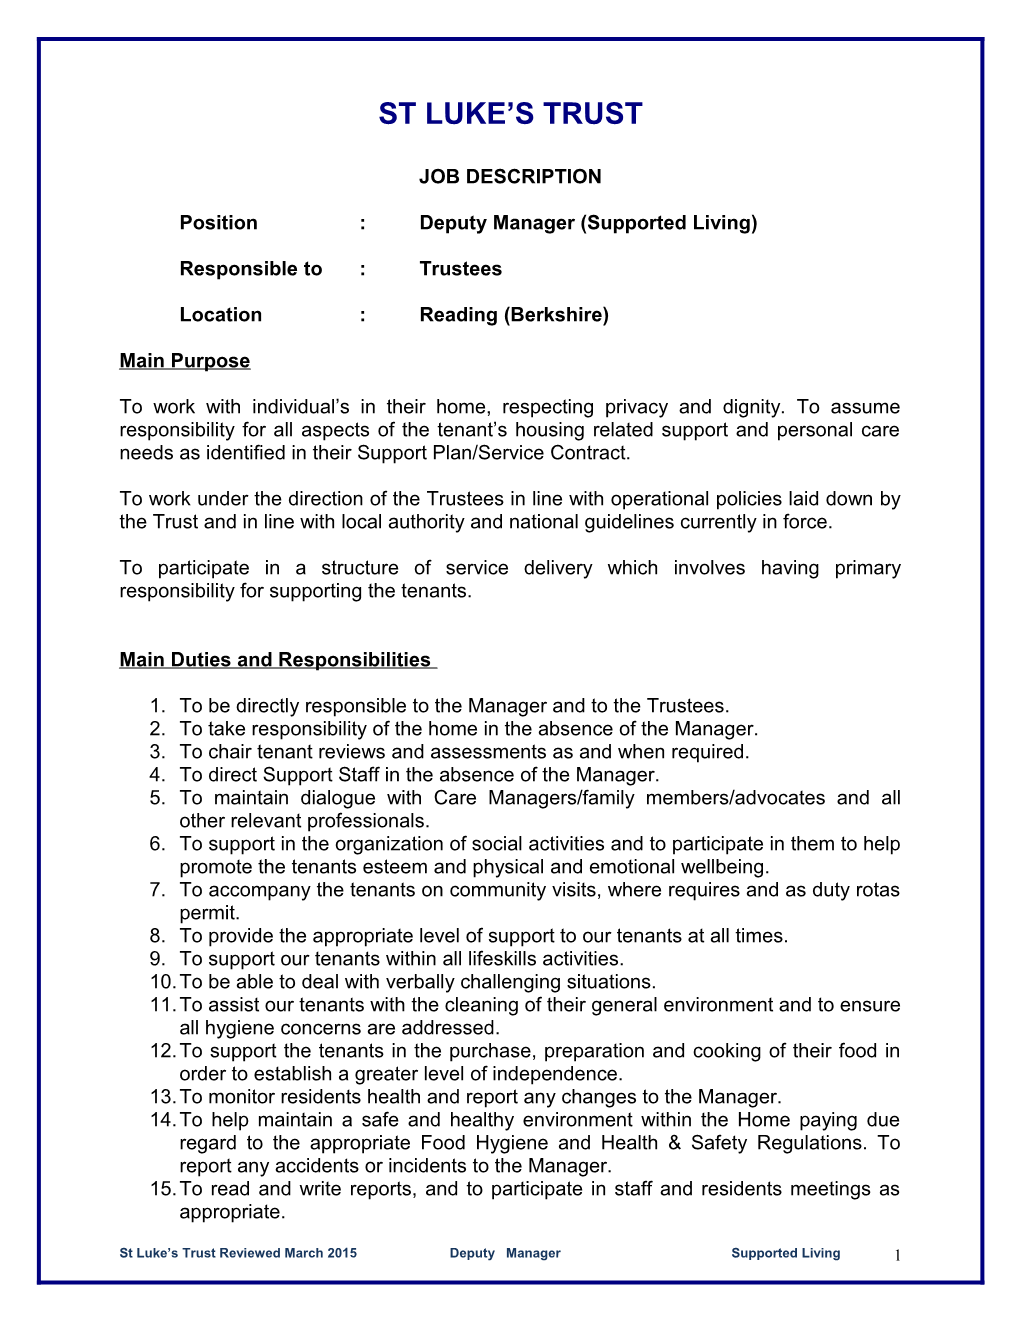 Position:Deputy Manager(Supported Living)